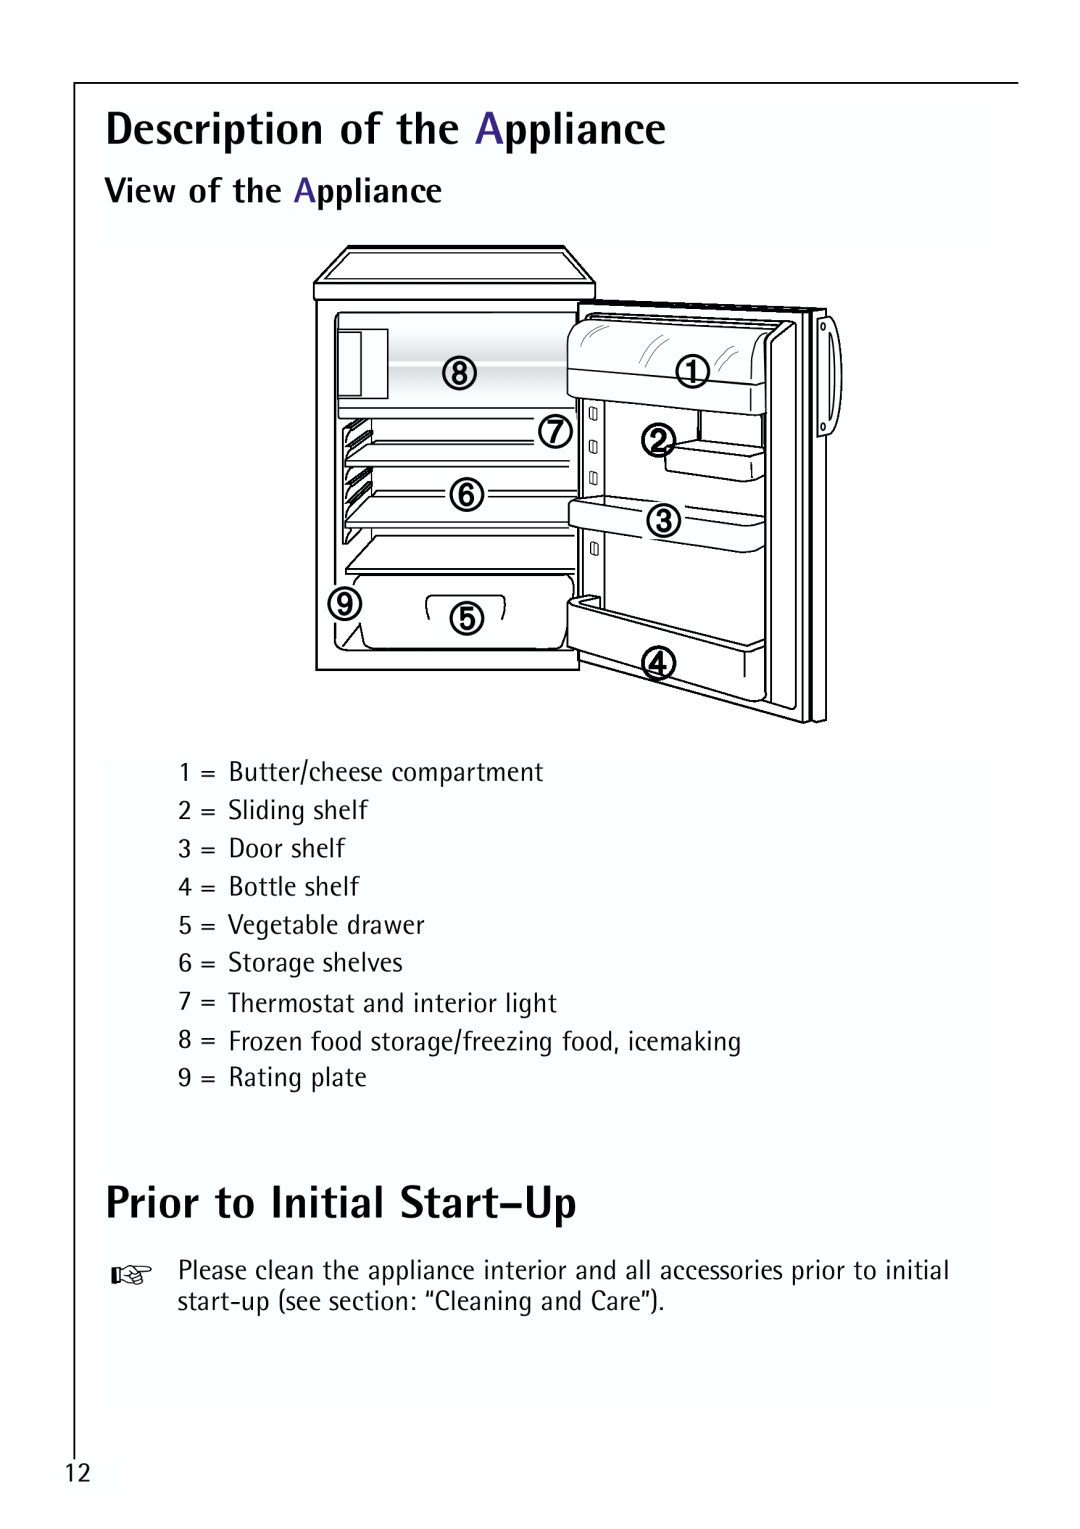 Electrolux 64150 TK manual Description of the Appliance, Prior to Initial Start-Up, View of the Appliance 